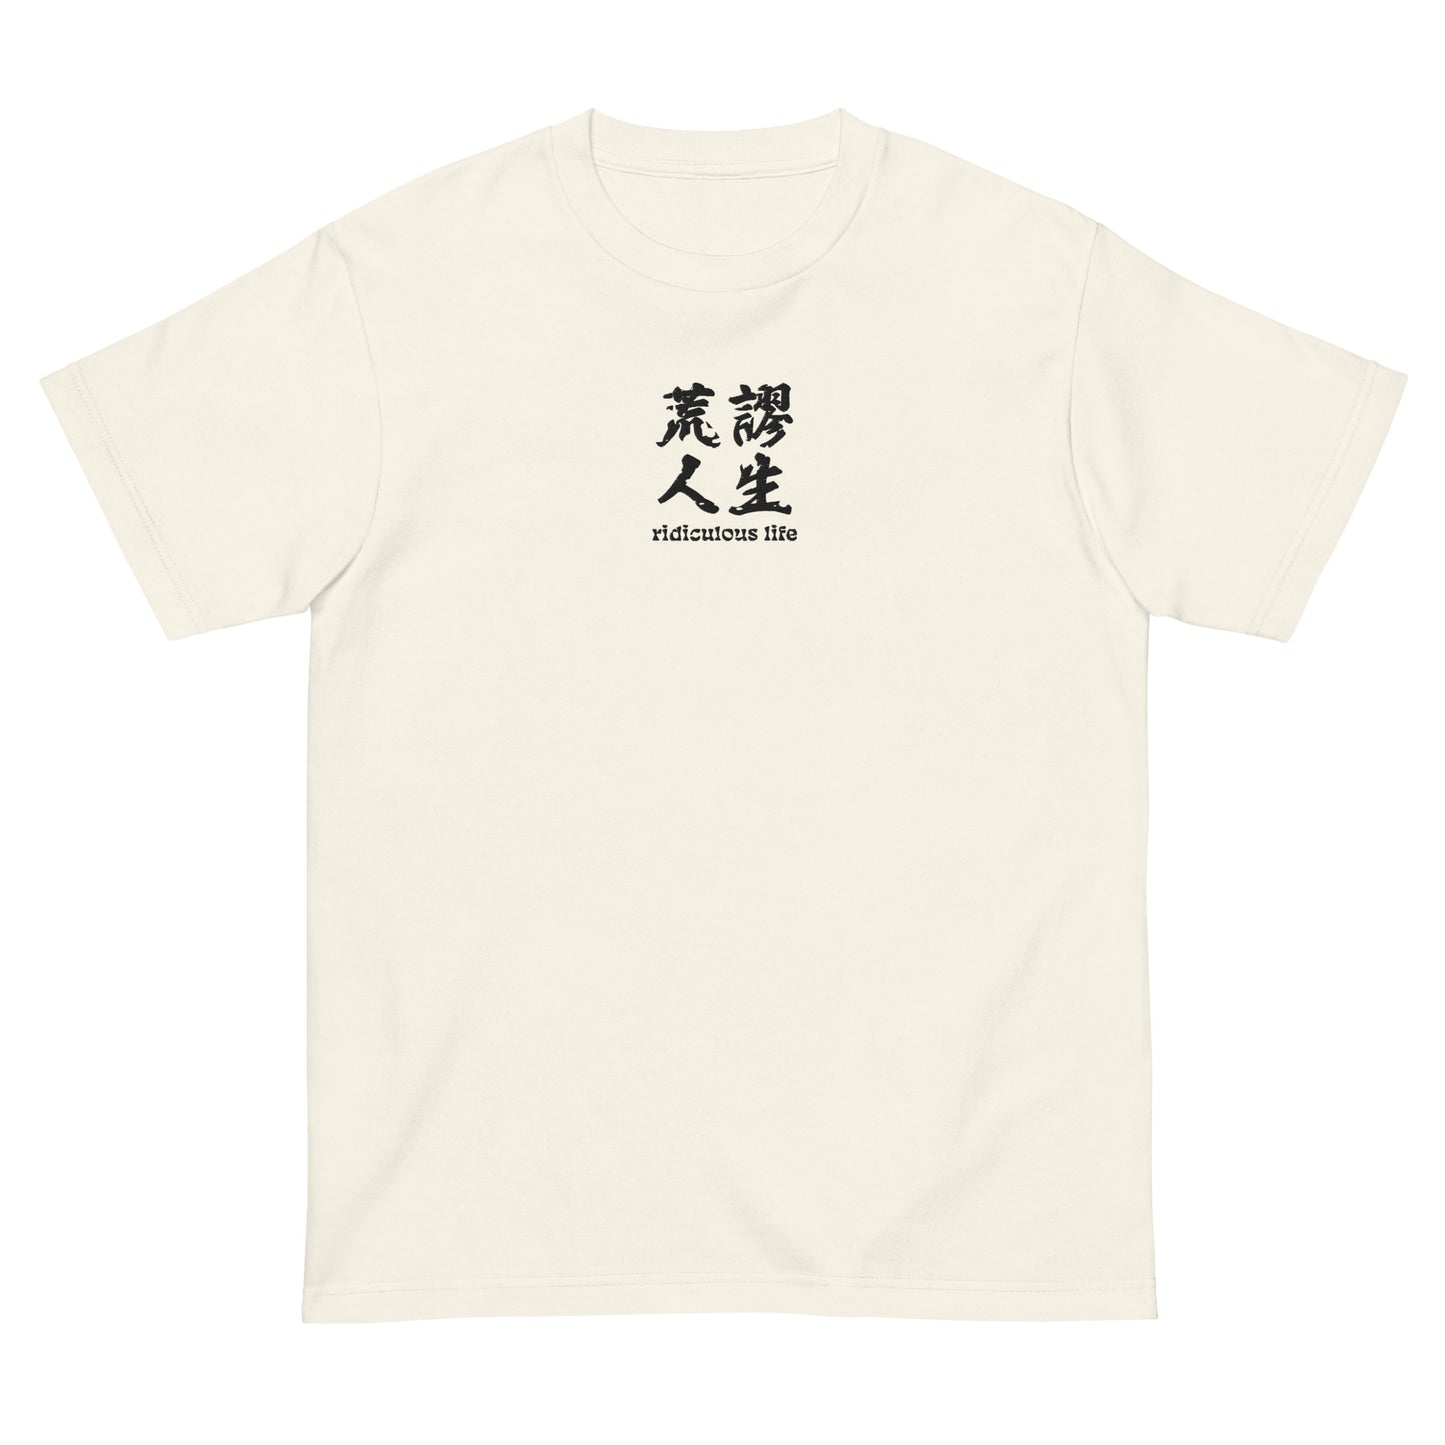 Ivory High Quality Tee - Front Design with an Black Embroidery "Ridiculous Life" in Chinese and English